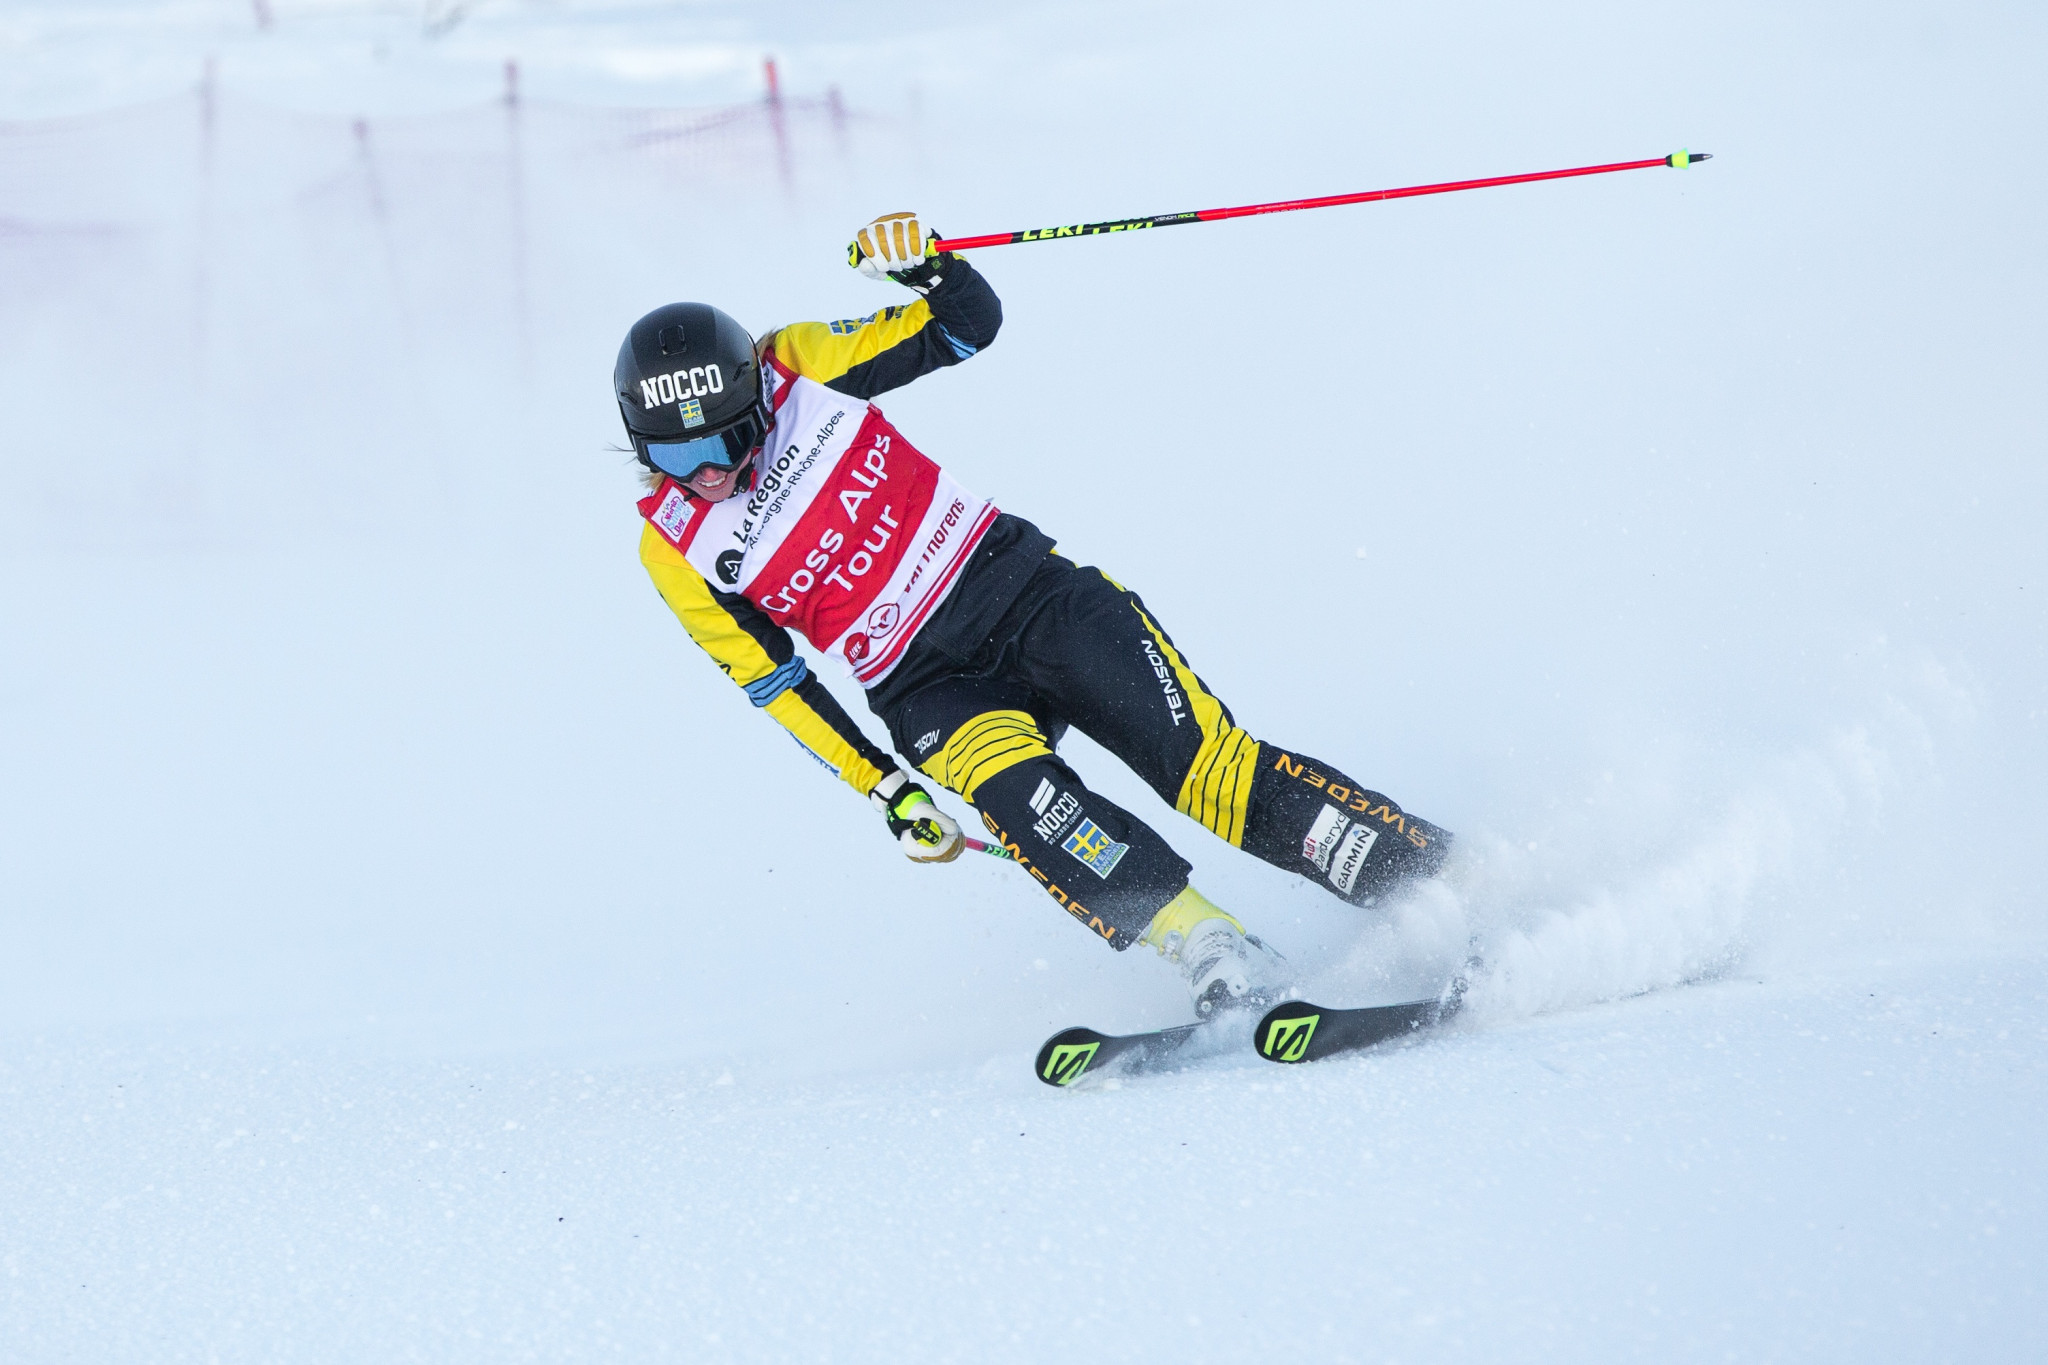 Näslund and Regez come out on top of Ski Cross World Cup in Idre Fjäll 